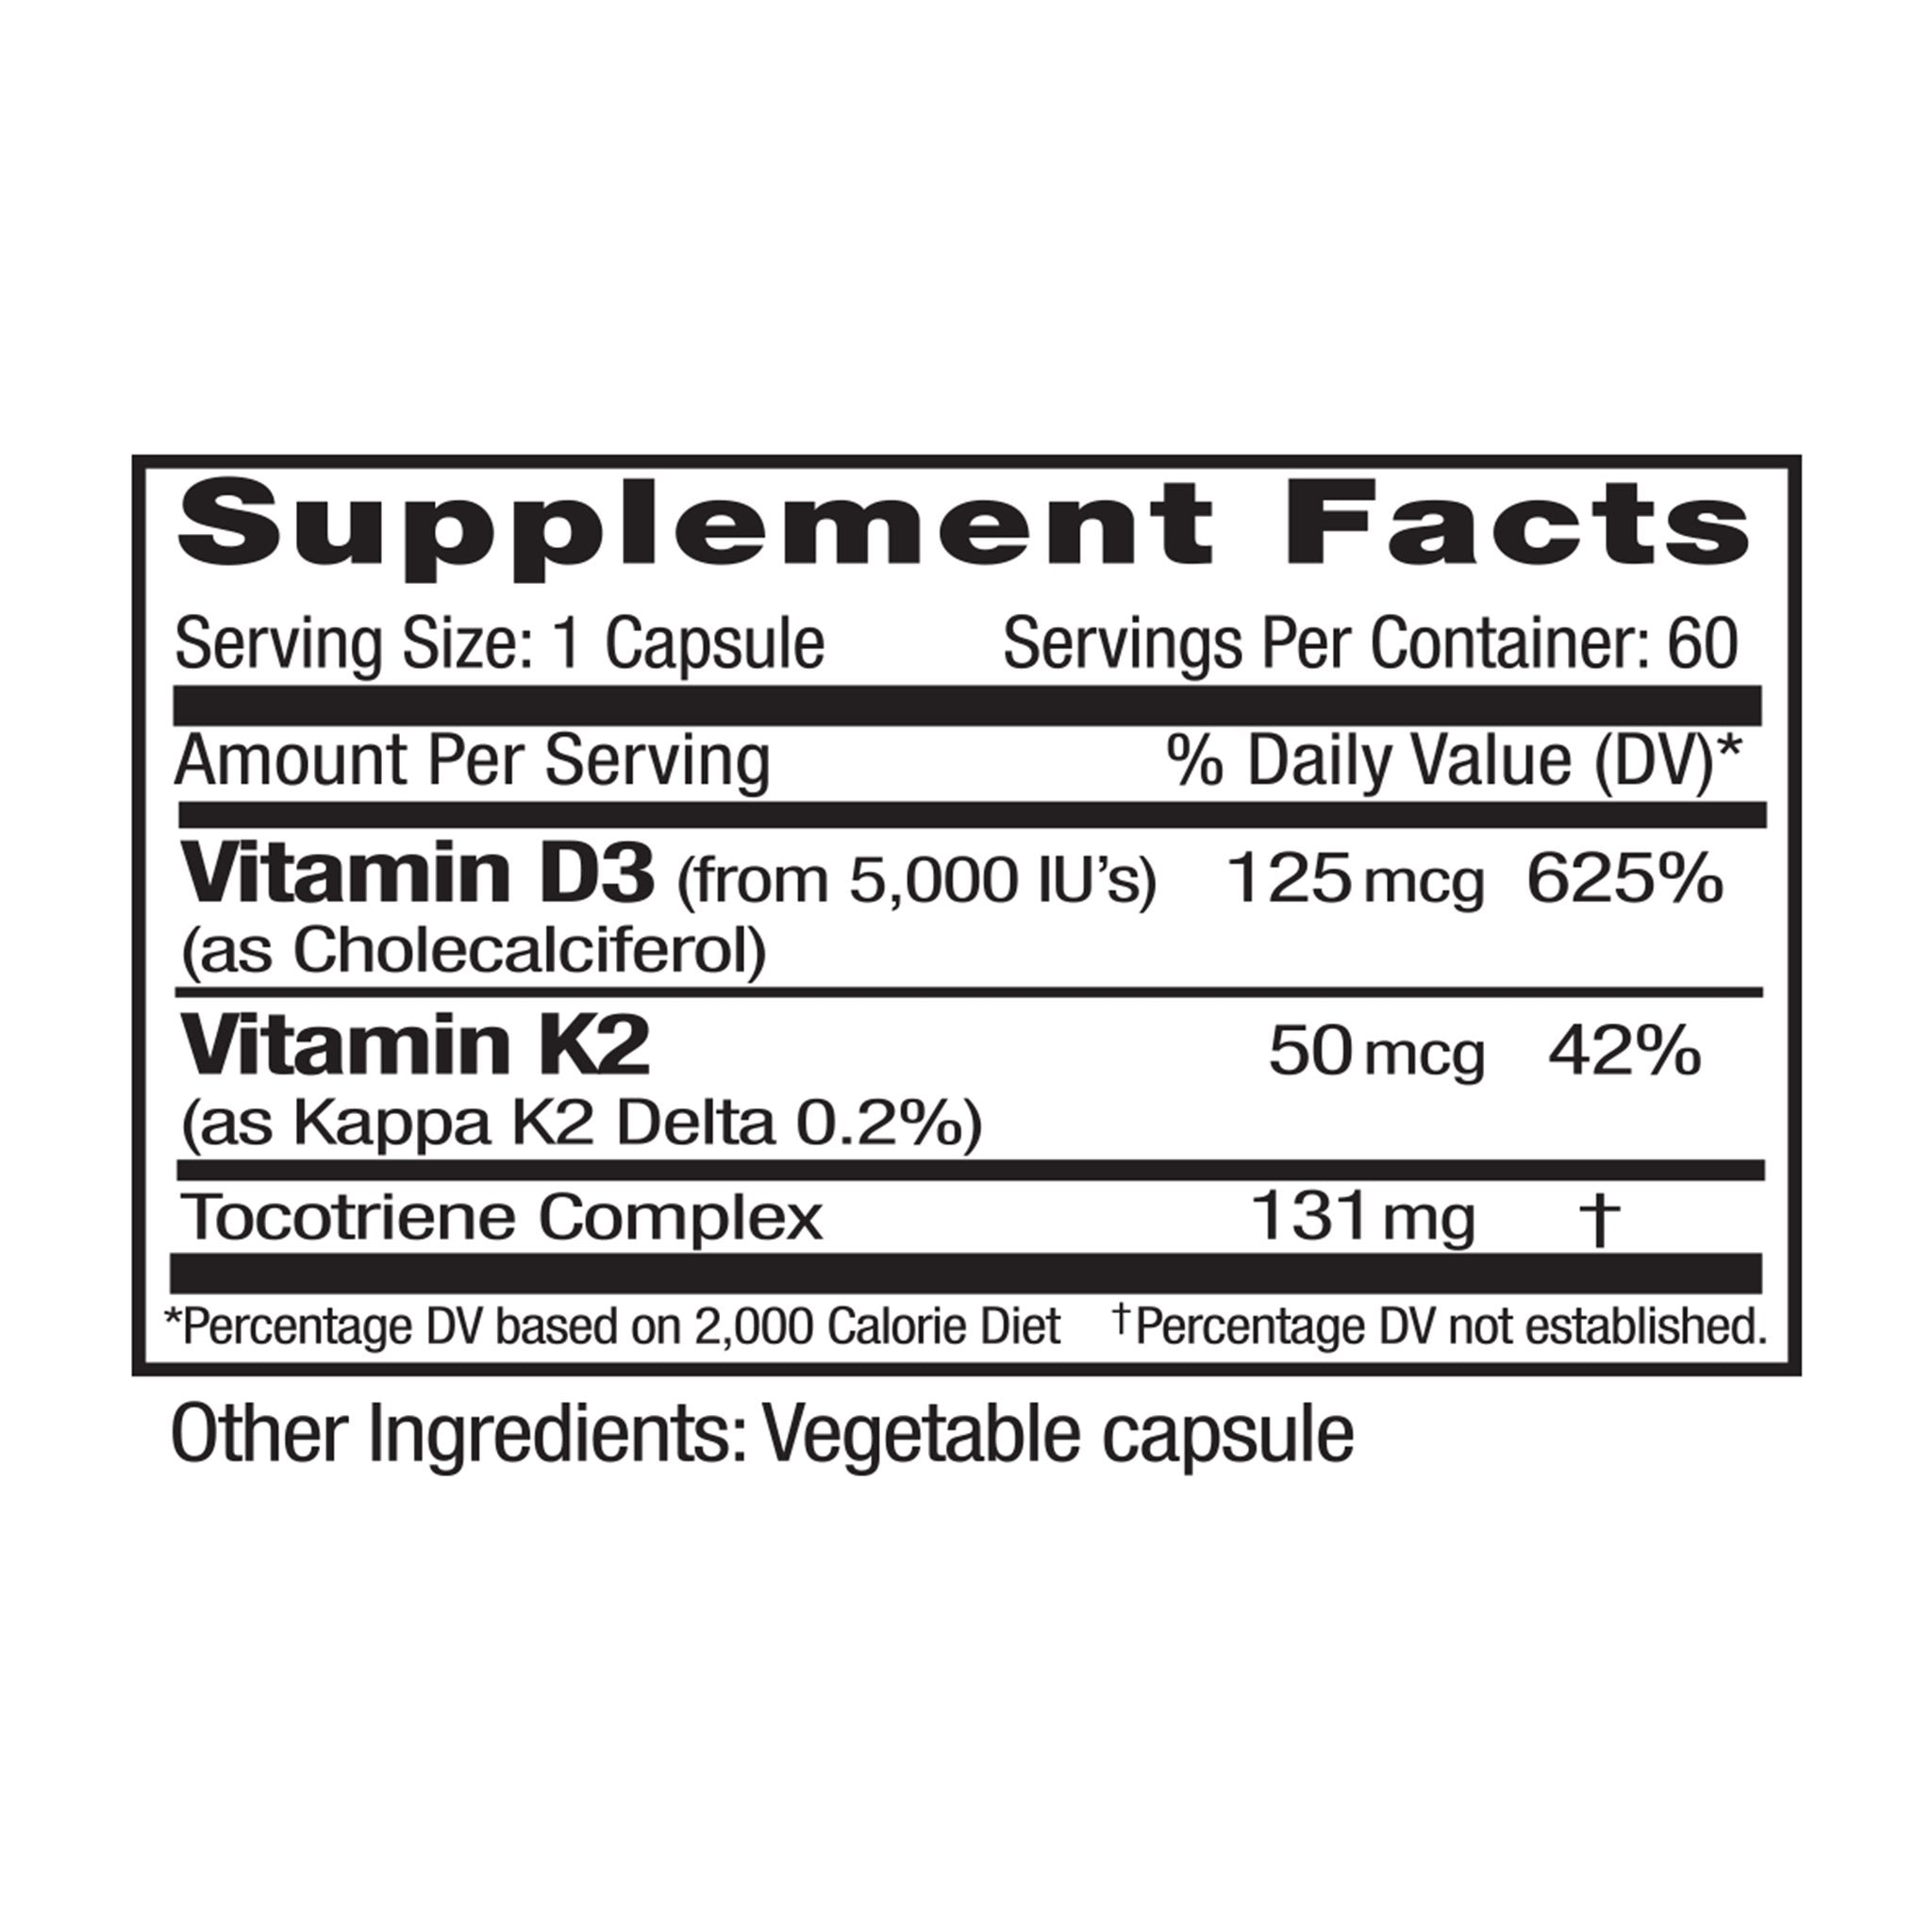 Supplement Facts for Vitamin D3 + K2